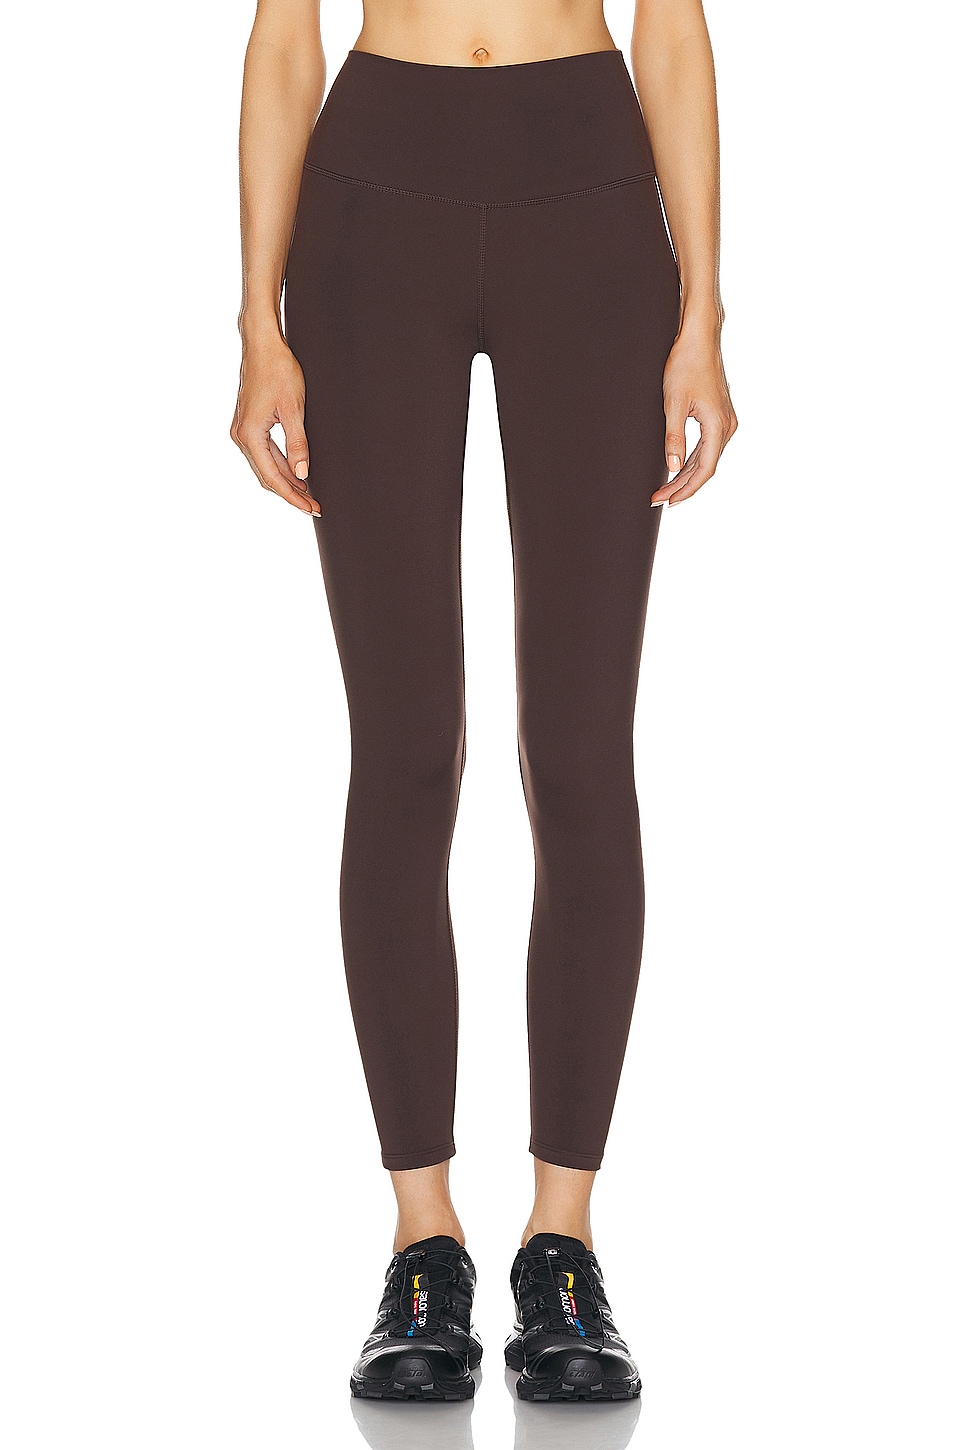 Image 1 of Varley Free Soft High Rise 25 Legging in Coffee Bean